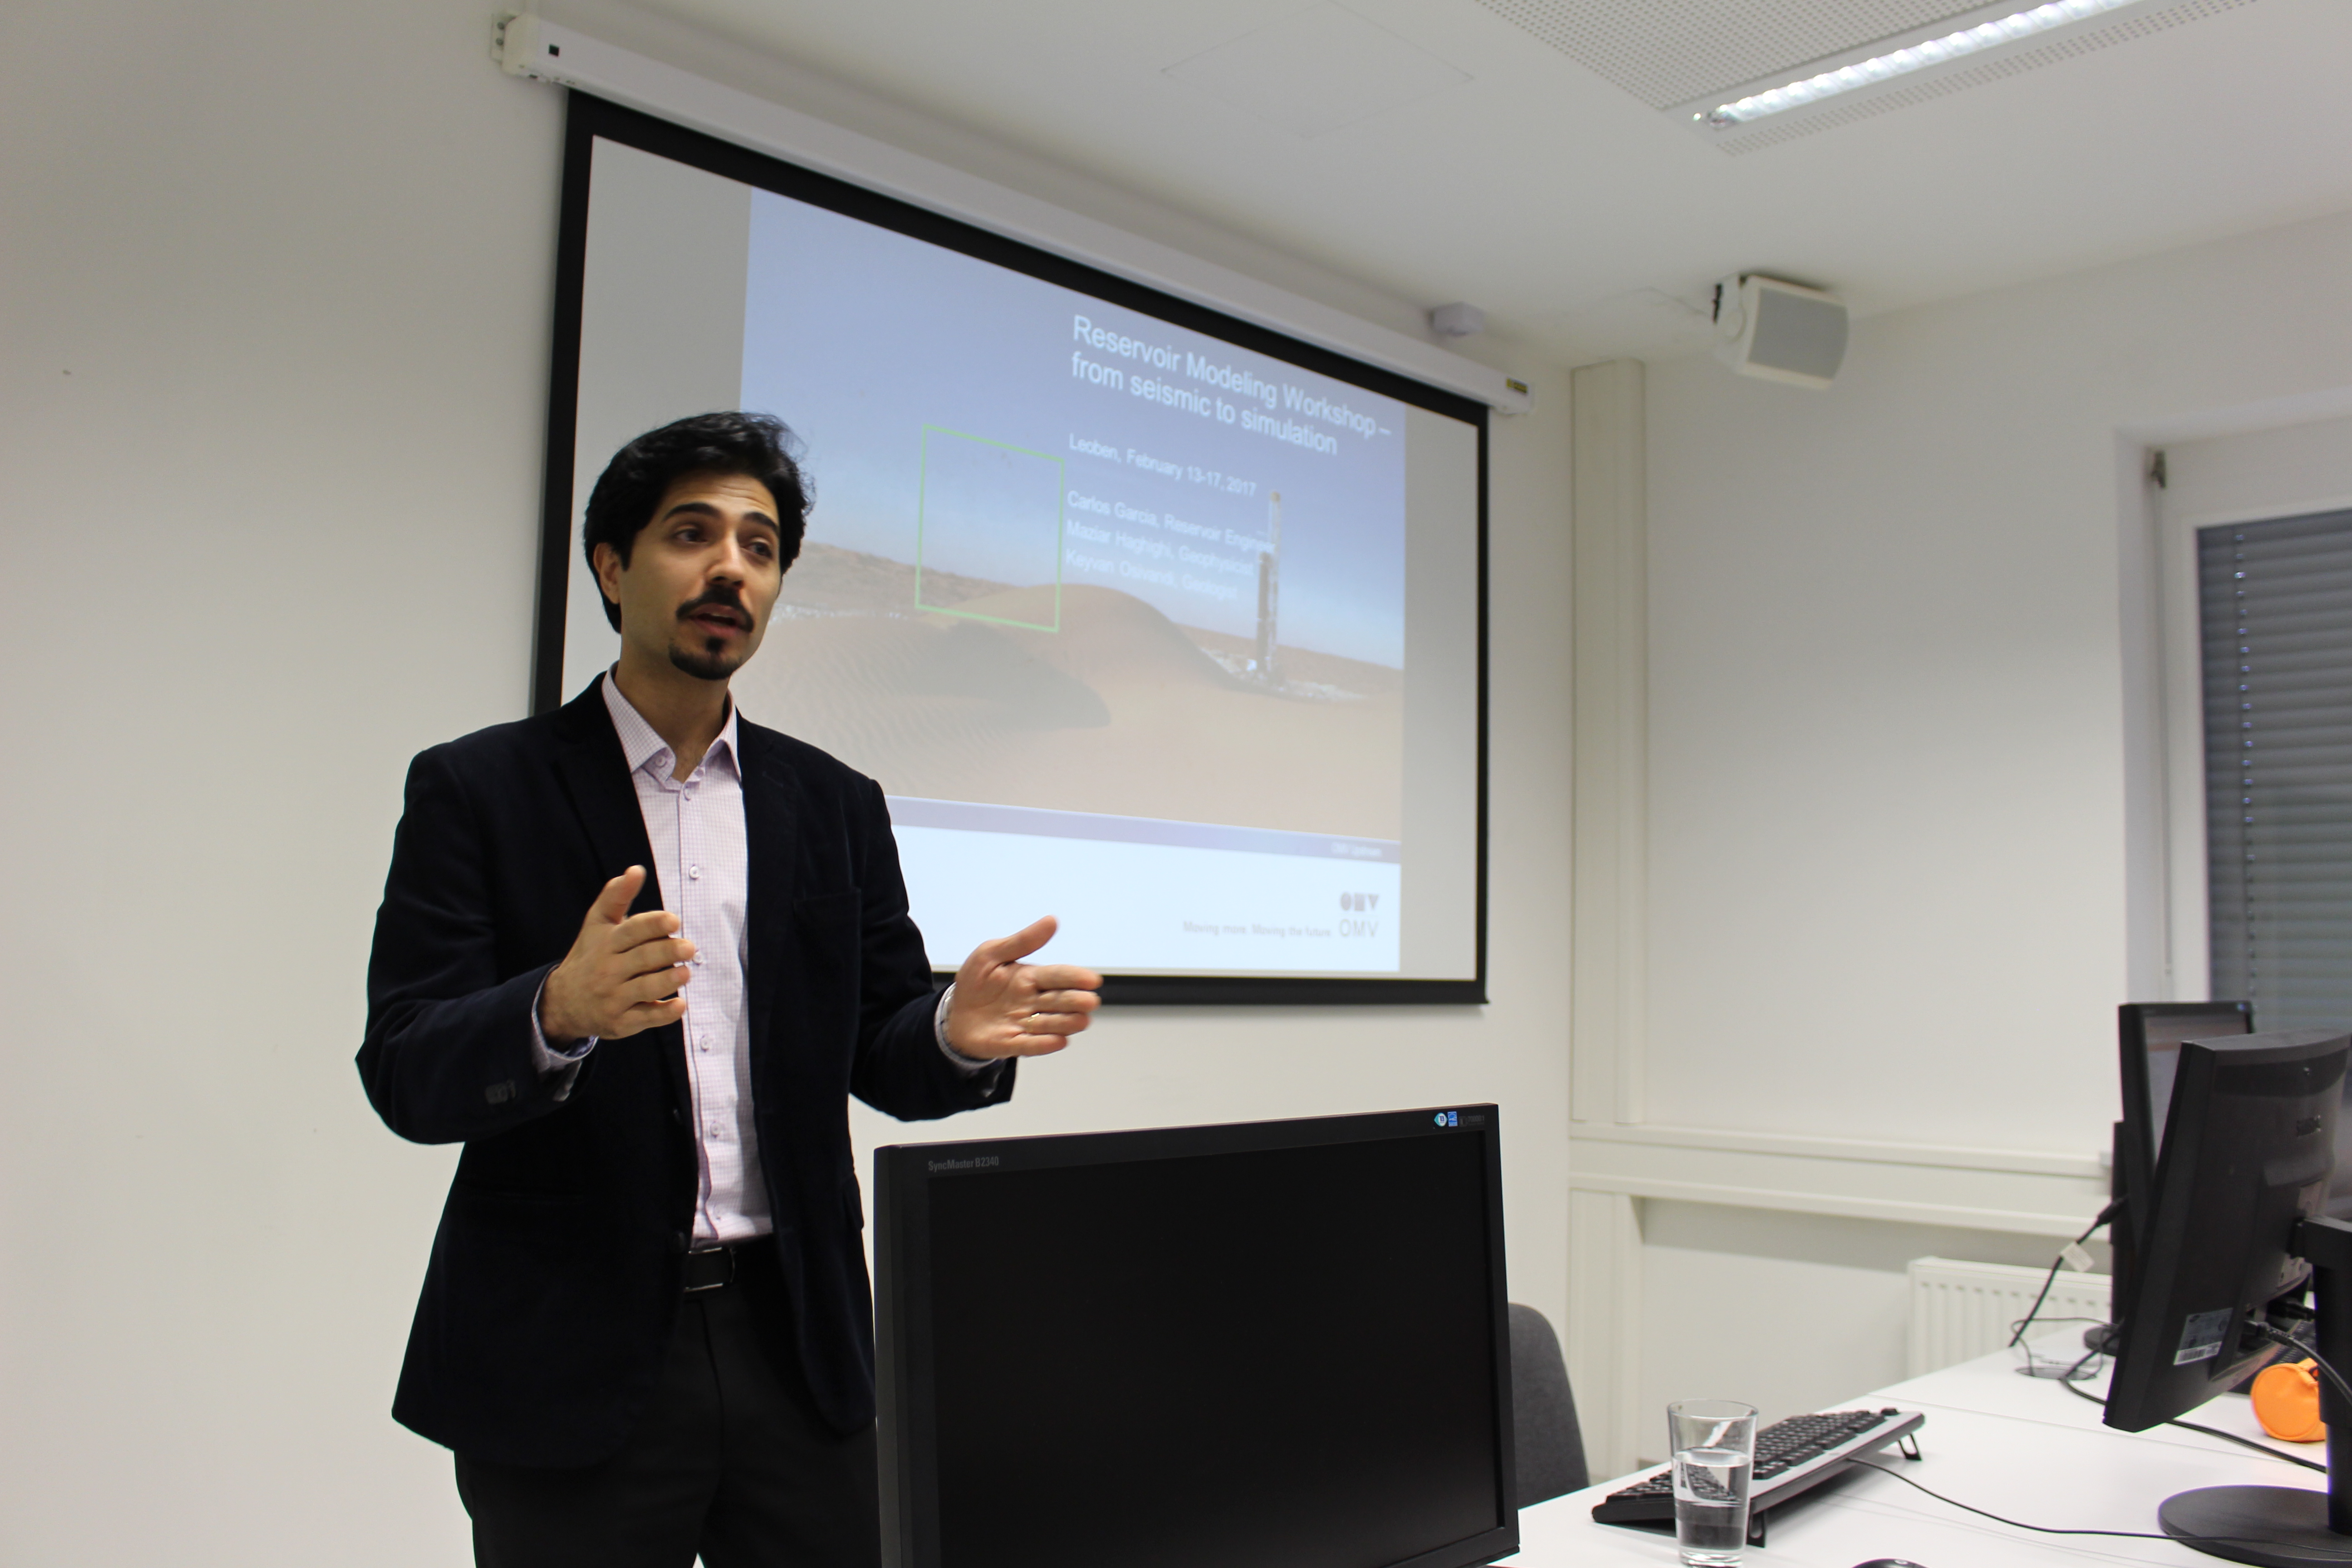 Mr. Haghighi giving an introduction into Petrel (Photo Credit: Thomas Herzog)